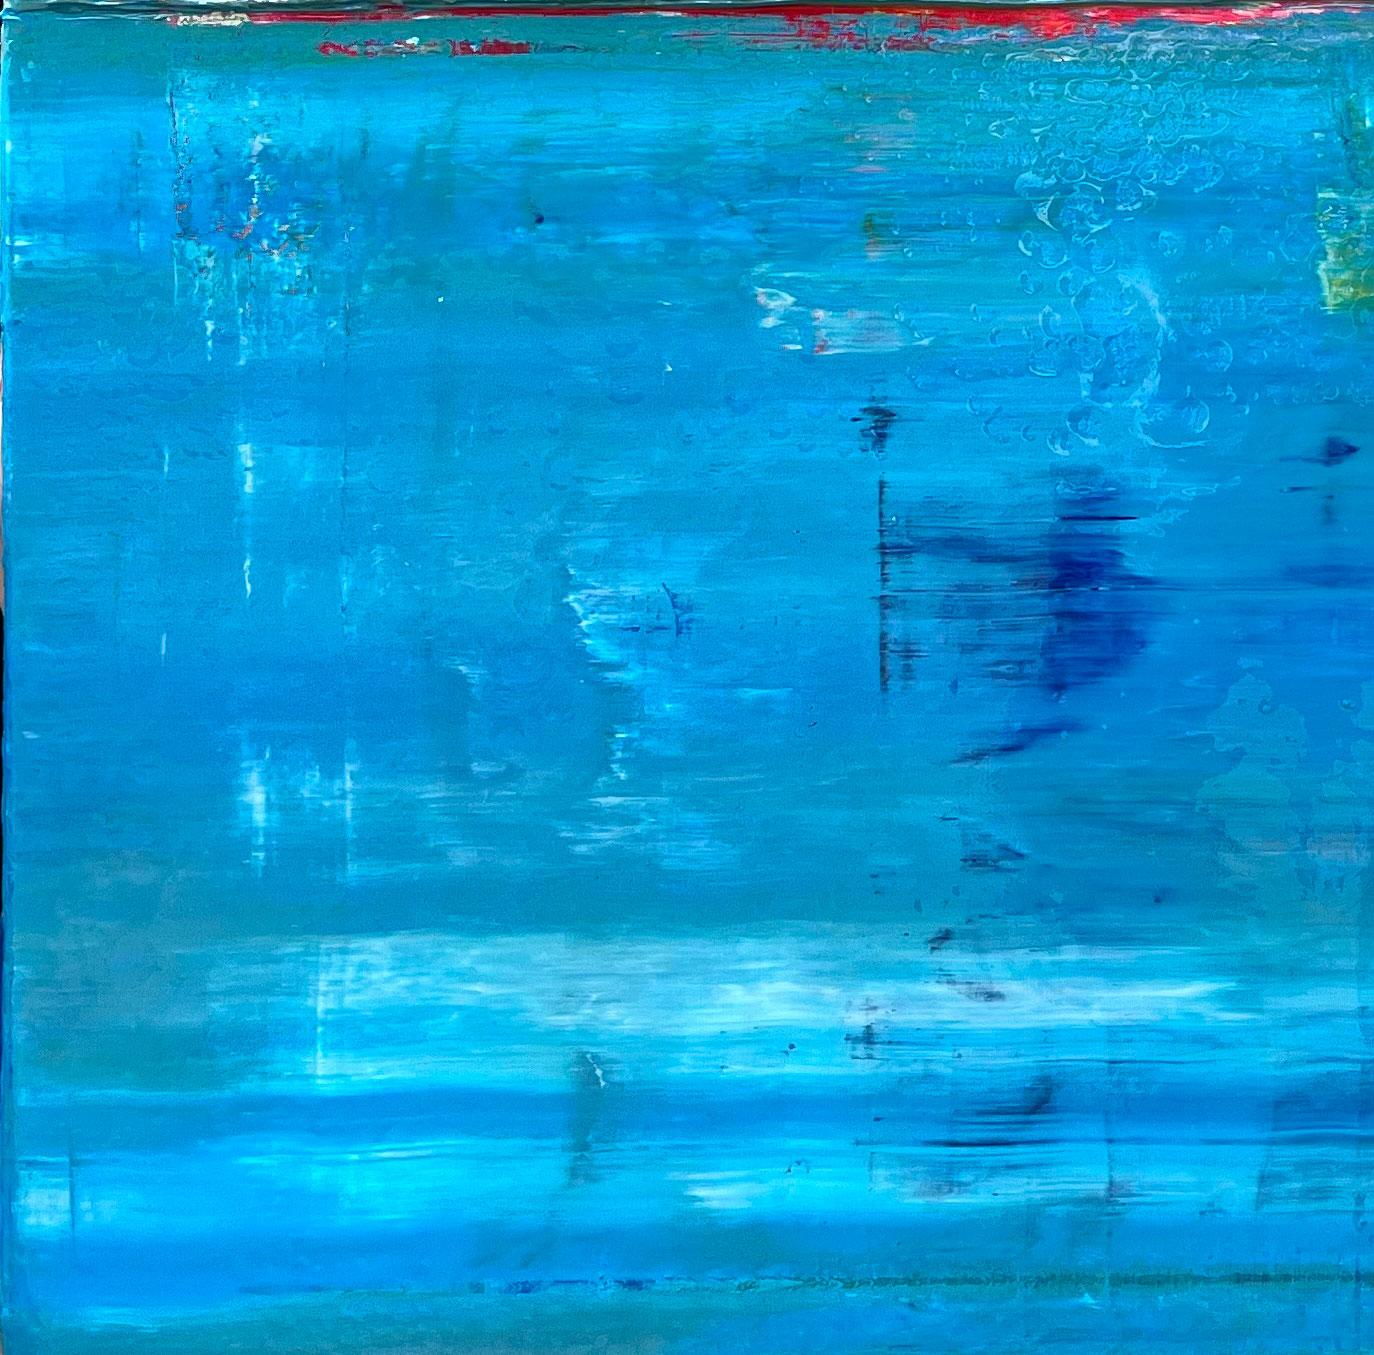 Climate Change - Malè, The Maldives - Abstract Painting by Antonio Franchi